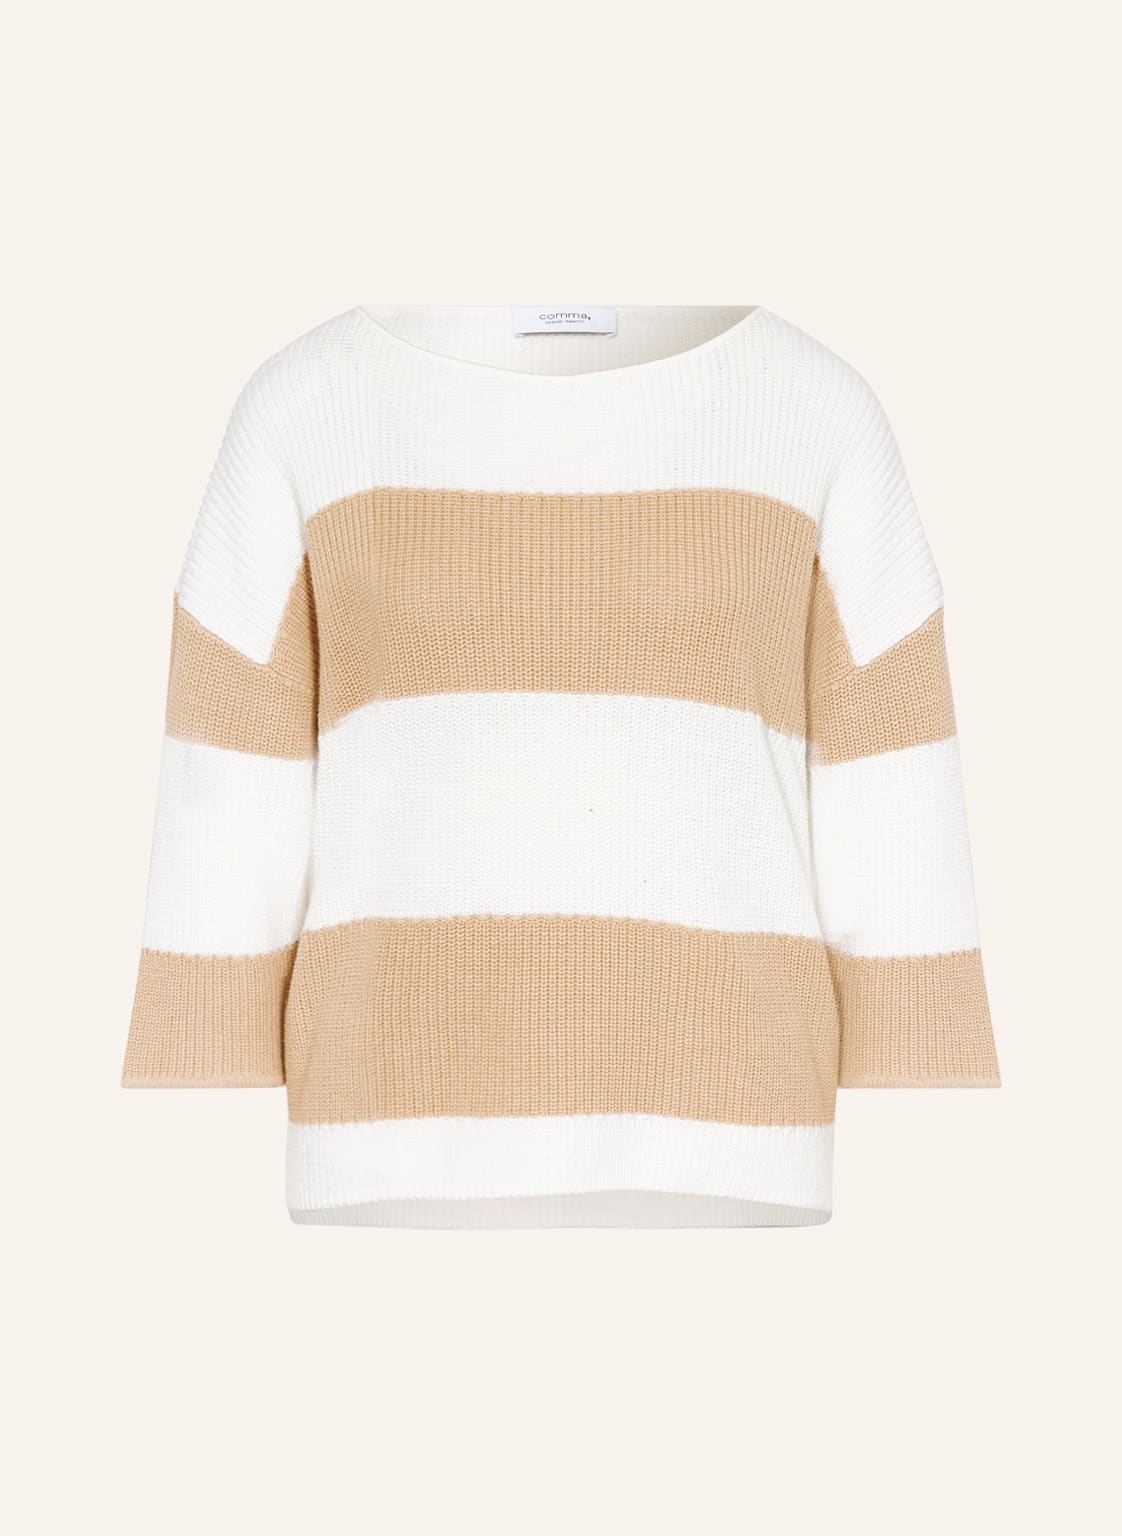 Comma Casual Identity Pullover Mit 3/4-Arm beige von comma casual identity